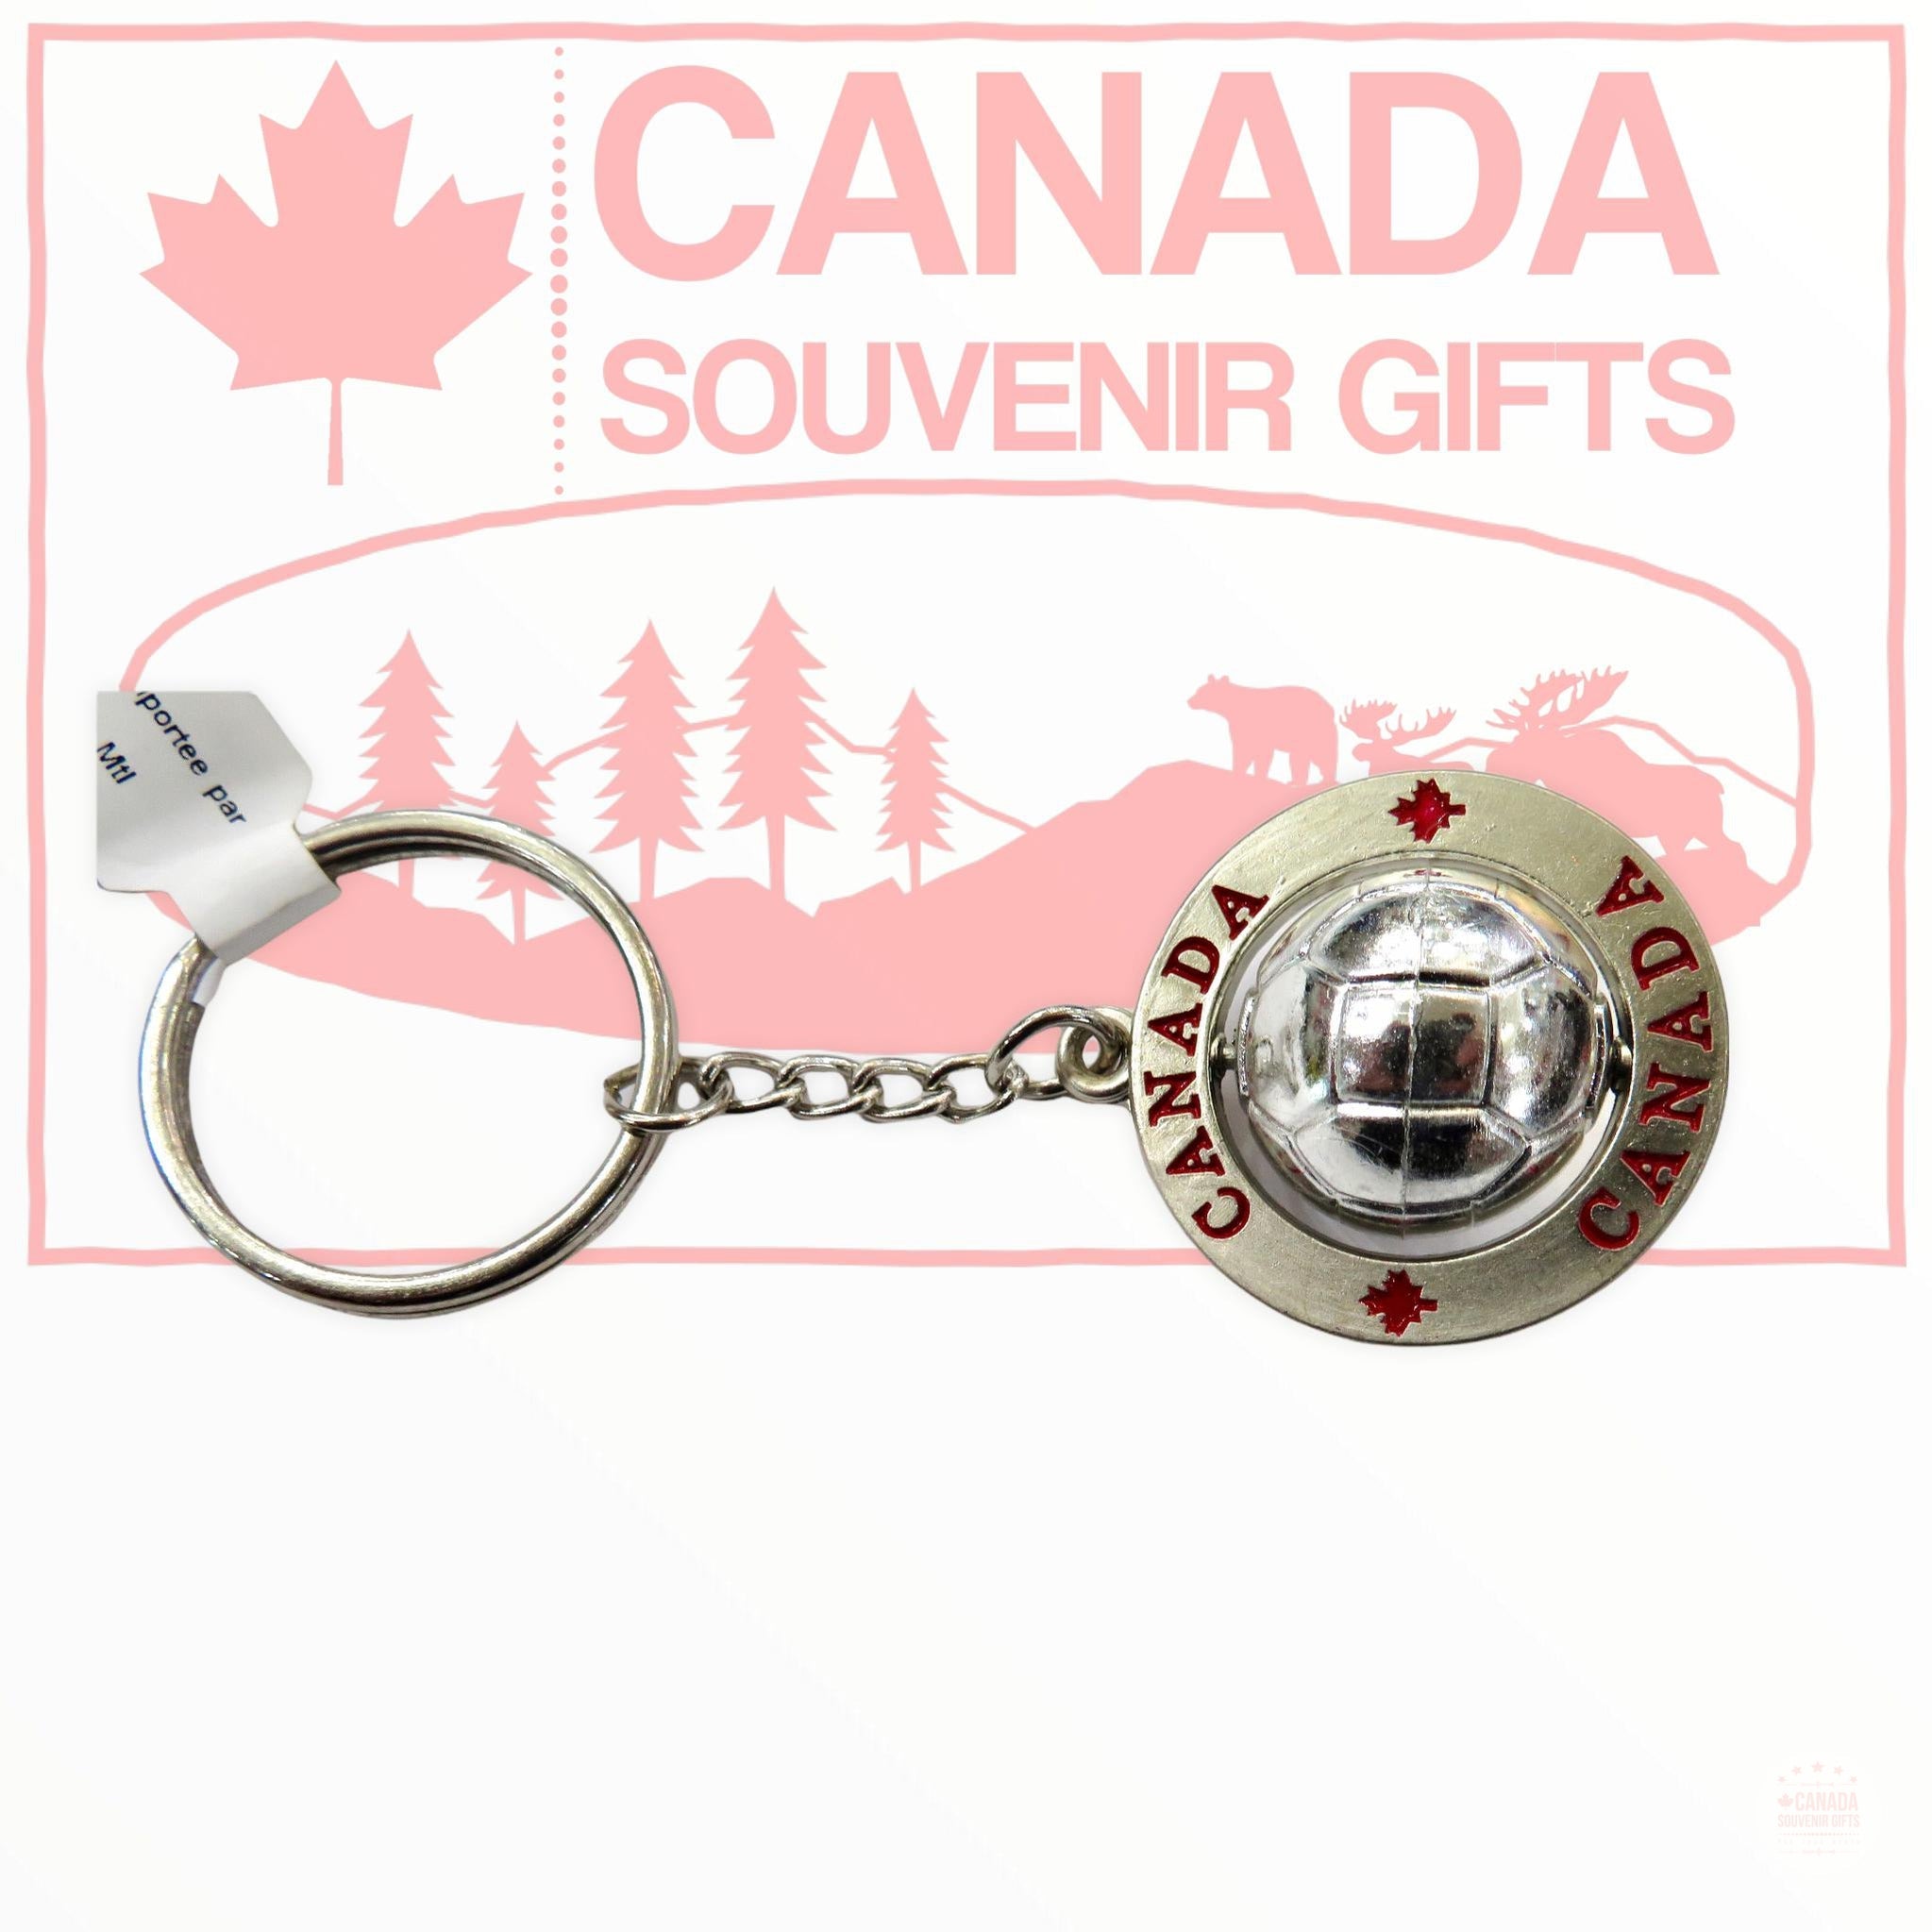 Canada Circle Shaped Keychain with spinning soccer ball Porte Cle